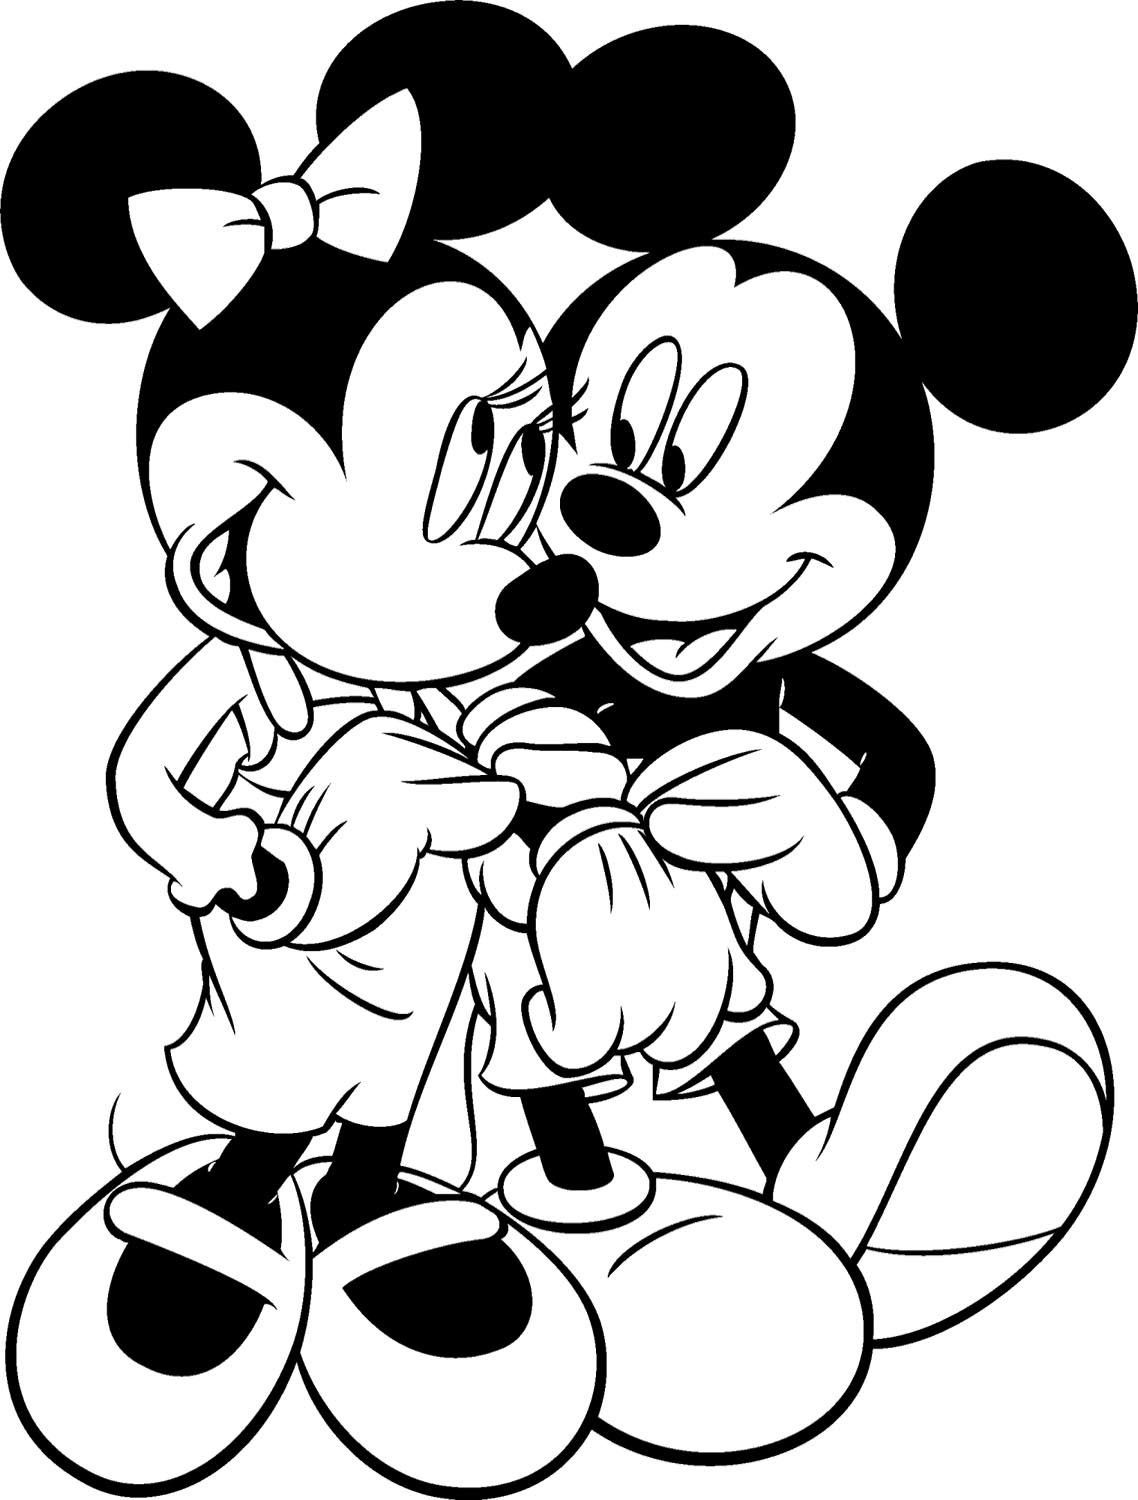 Mickey Mouse And Minnie Coloring Pages Coloring Pages Minnie Mouse Games On Disney Junior Mickey And